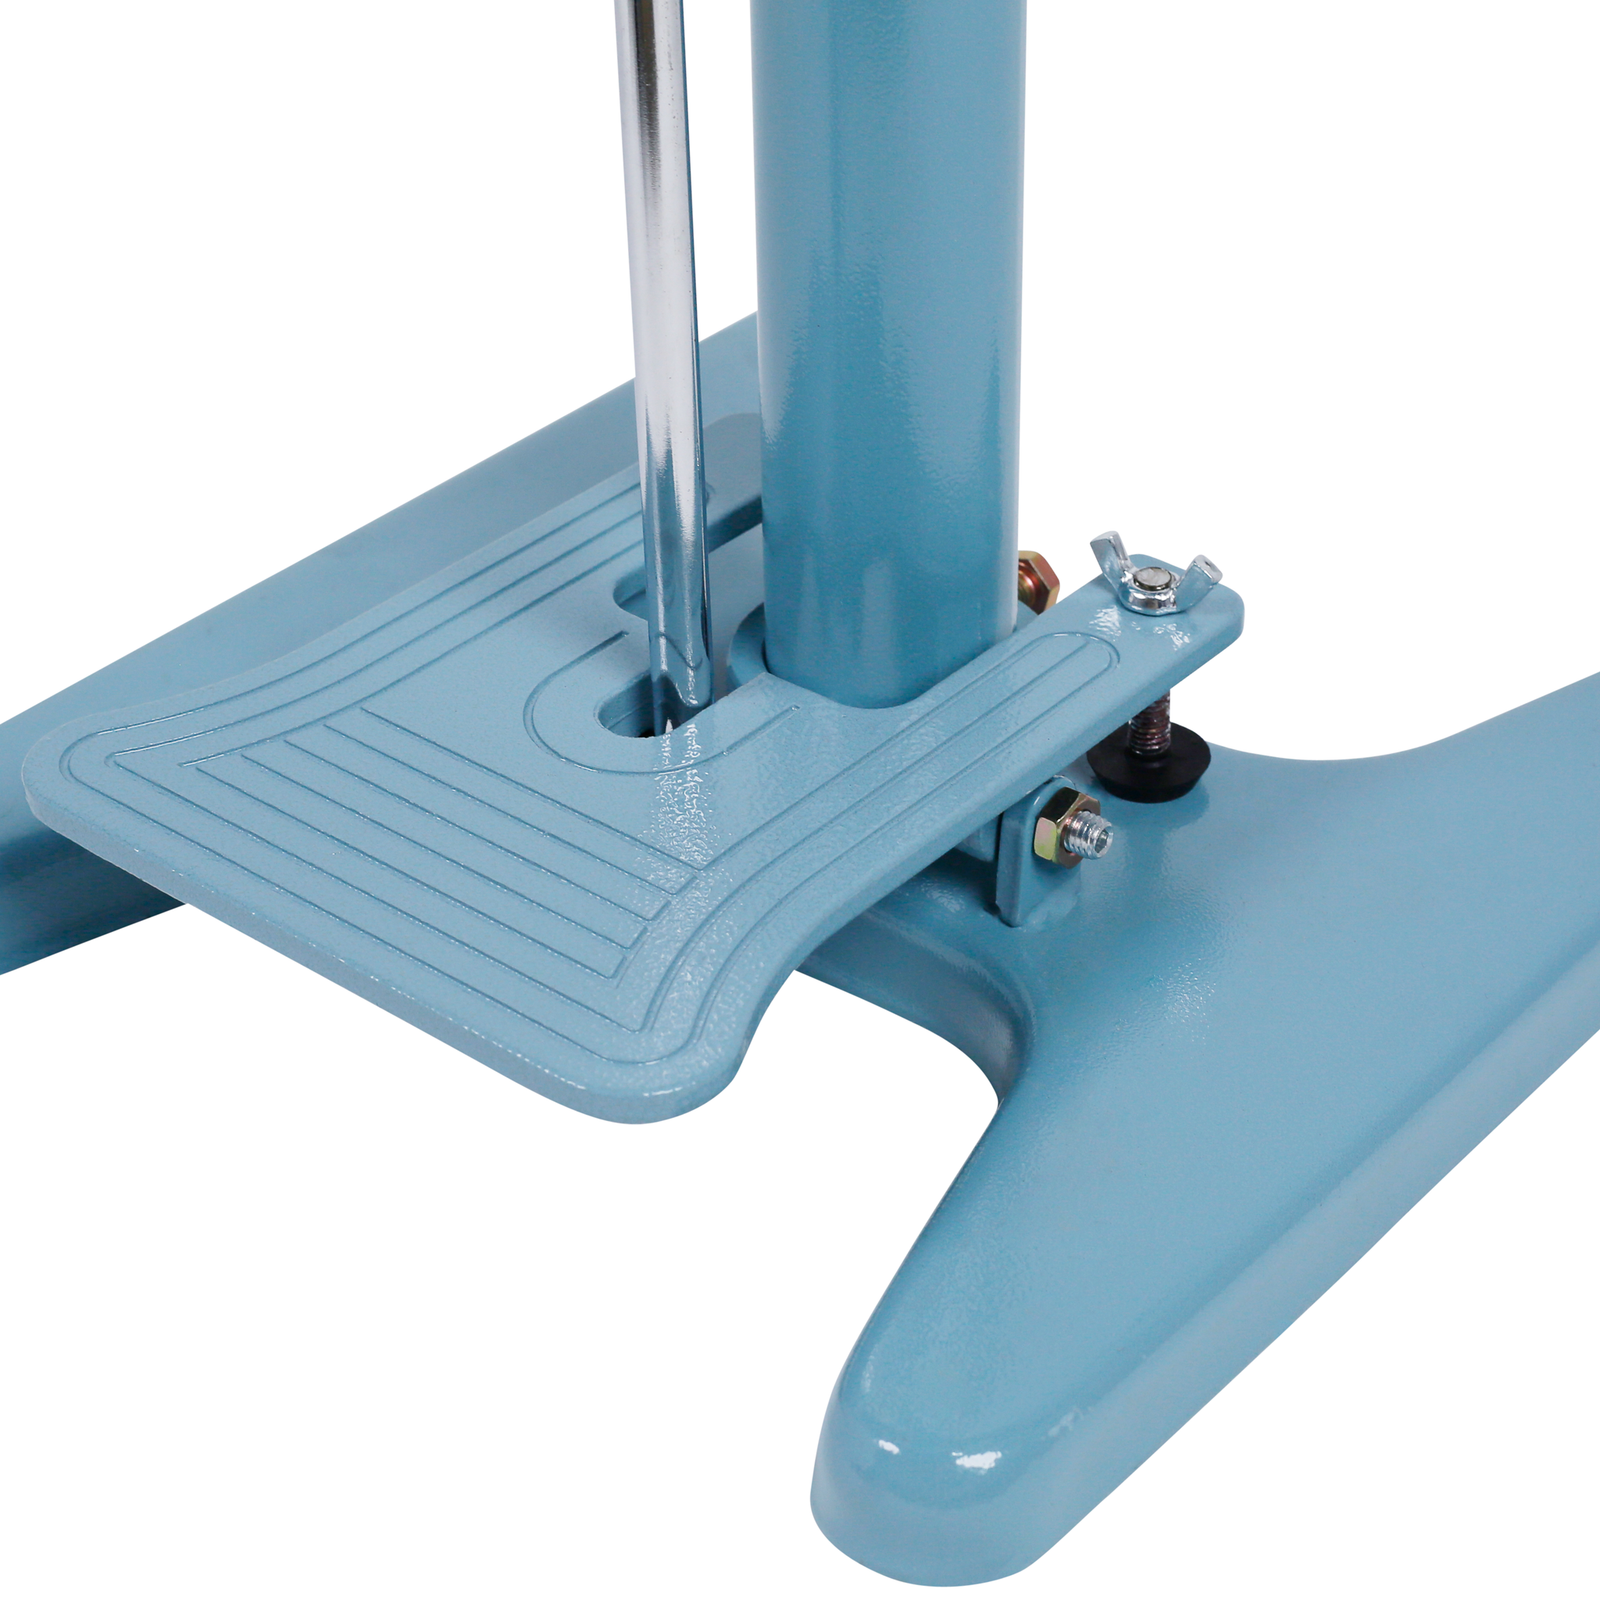 closeup of the pedal of the double heat foot impulse bag sealer